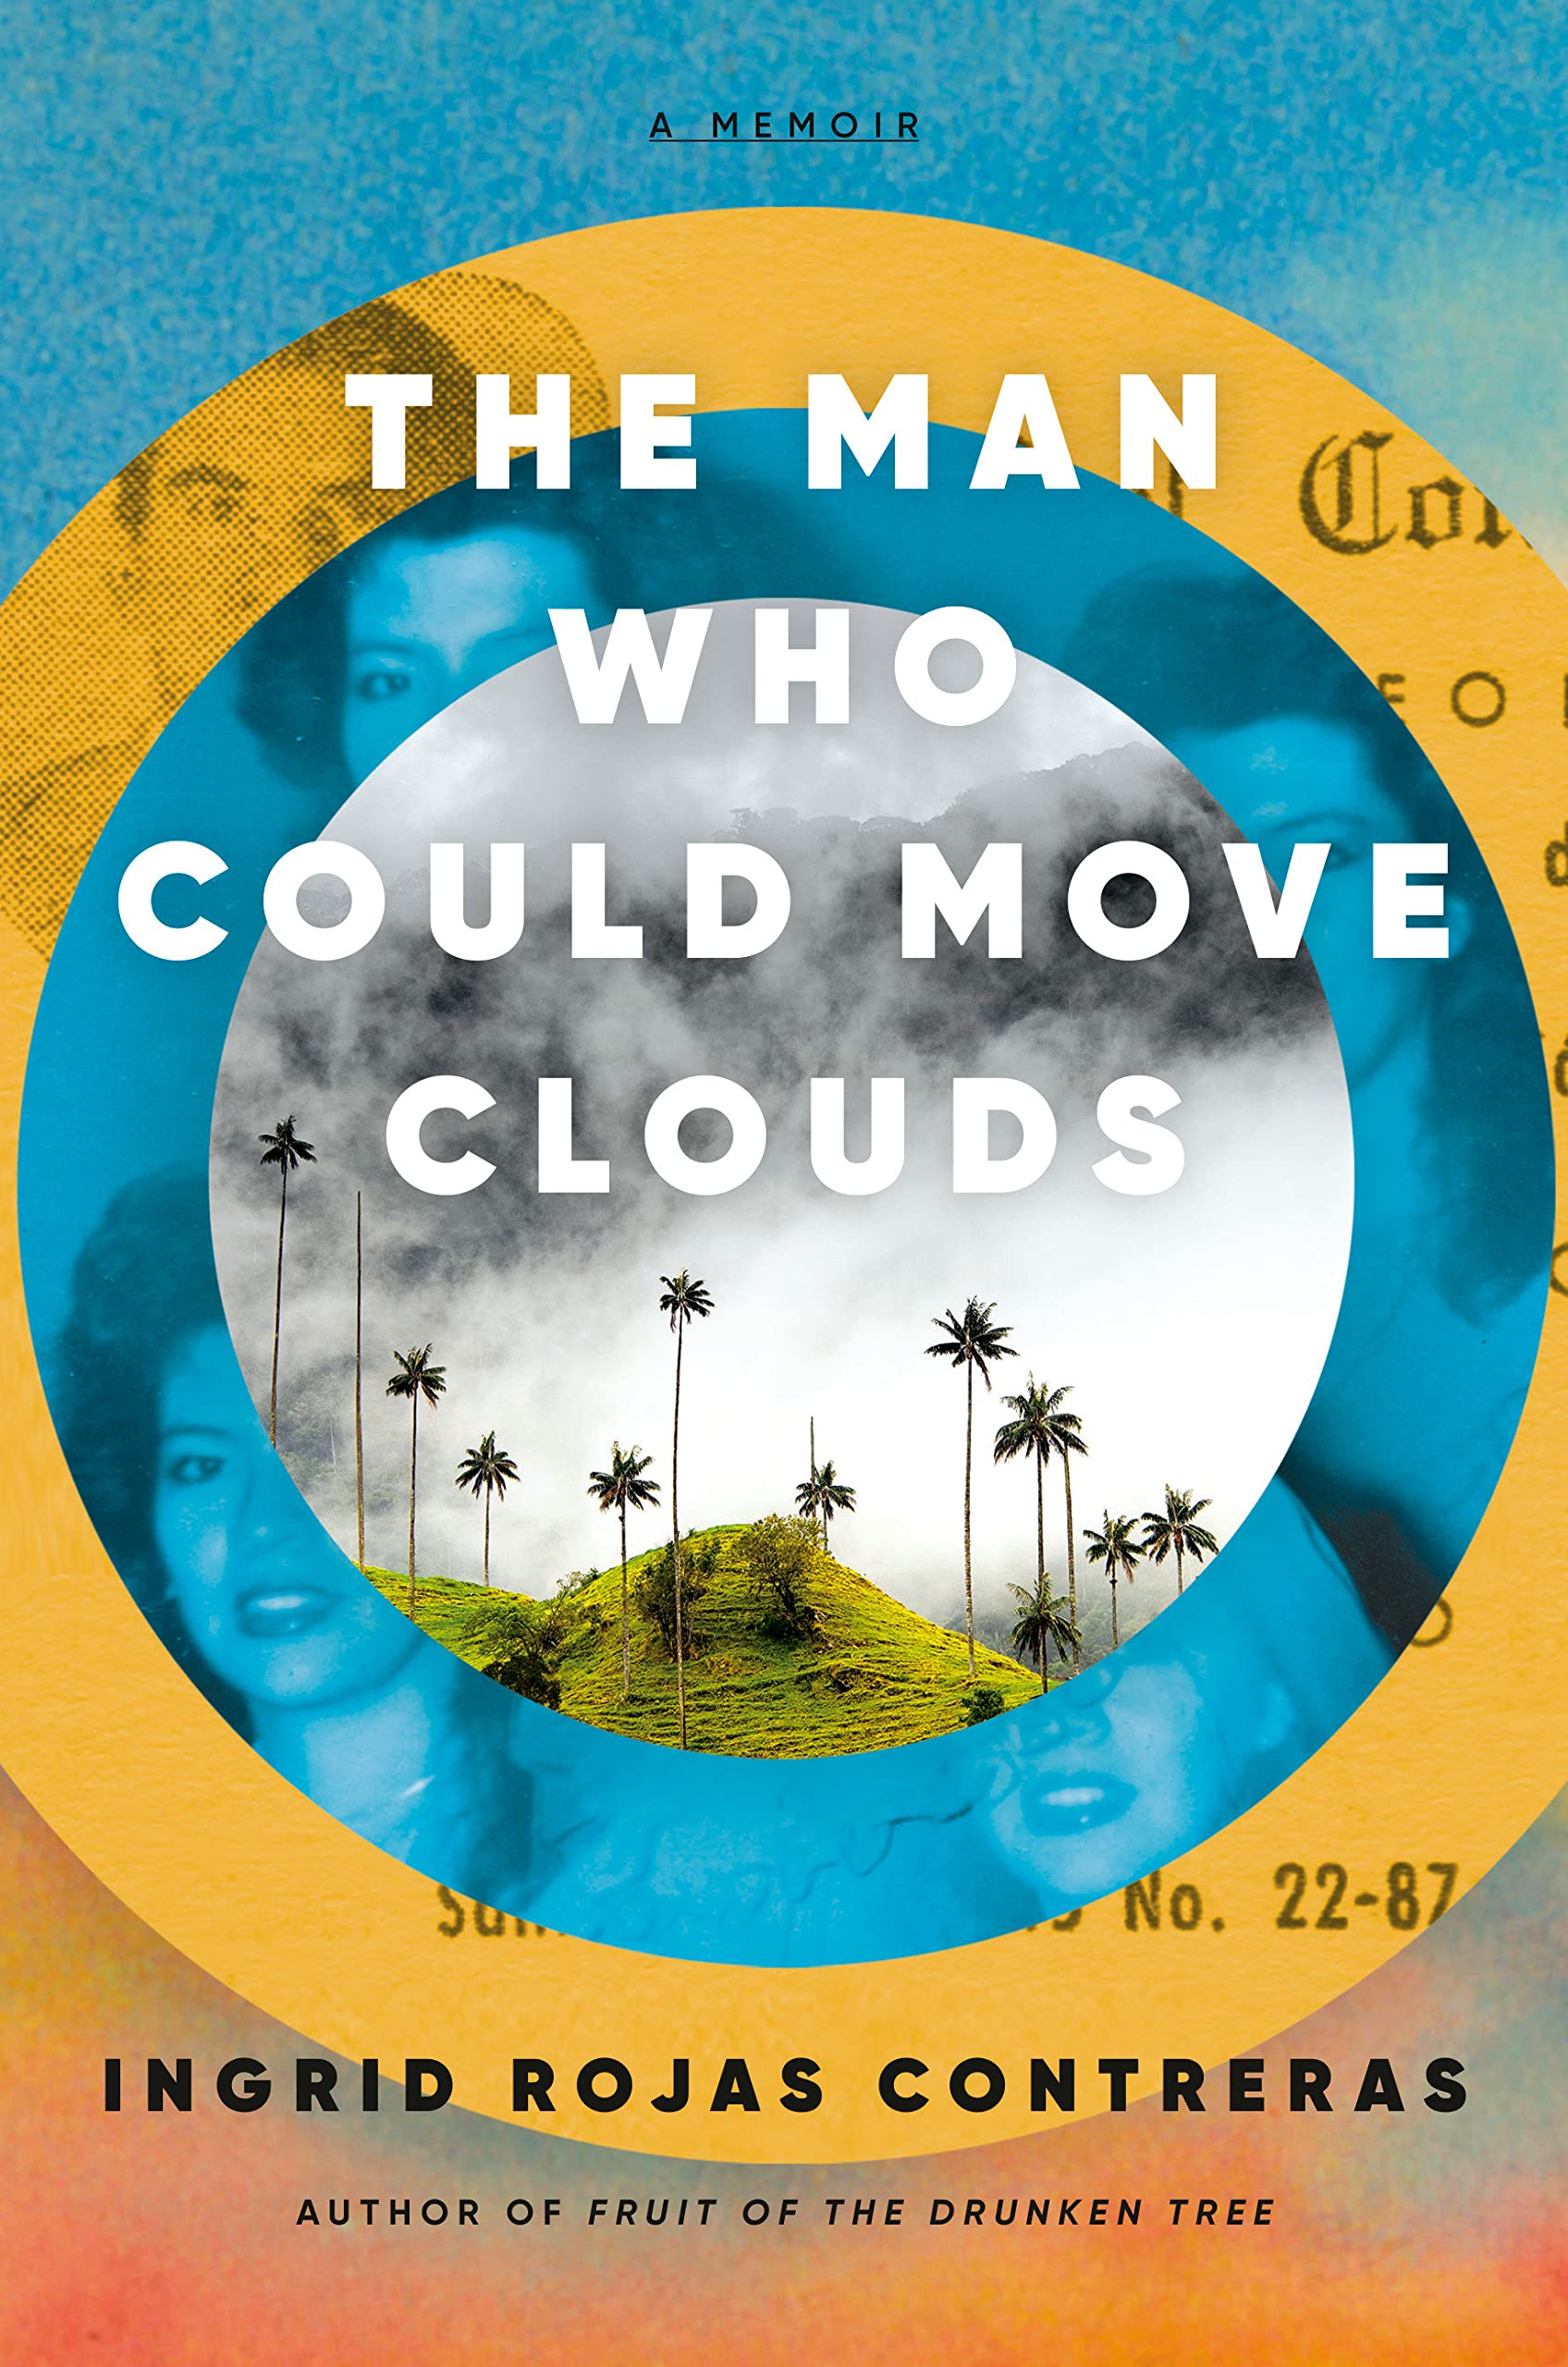 book cover the man who could move clouds by omgrod rpjas contreras